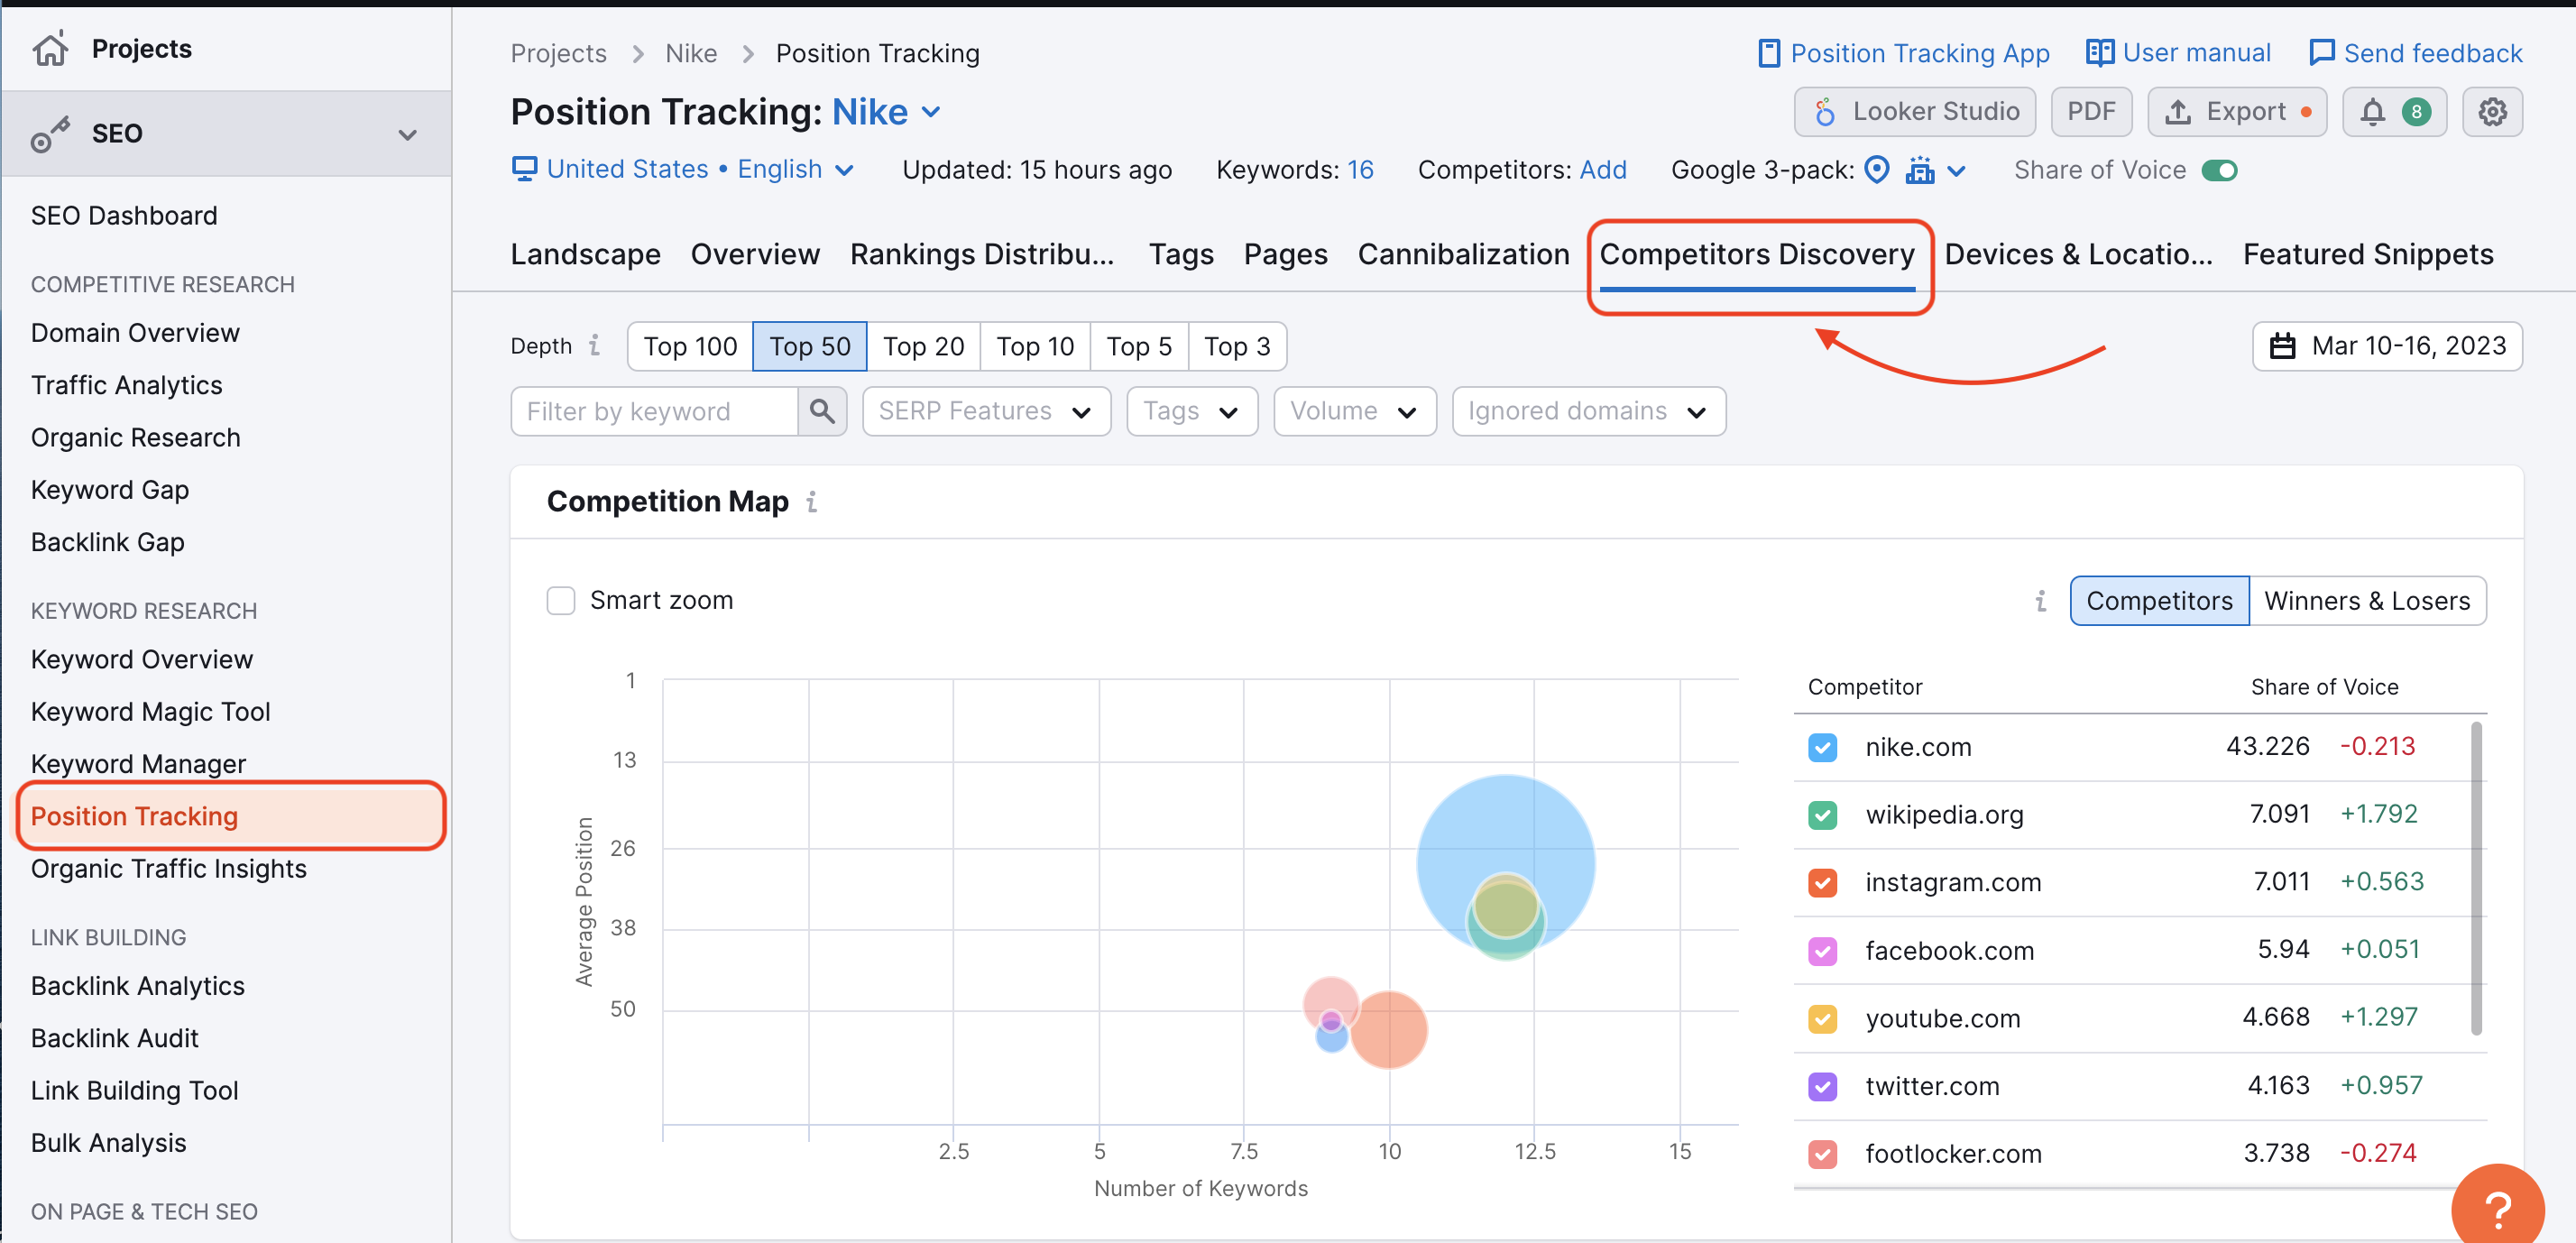 An example of Competitors Discovery report in Position Tracking. The tab of this report is highlighted, a red arrow is pointing to it. Another thing highlighted on the screenshot is the name of the Position Tracking tool in the list of tools on the left.